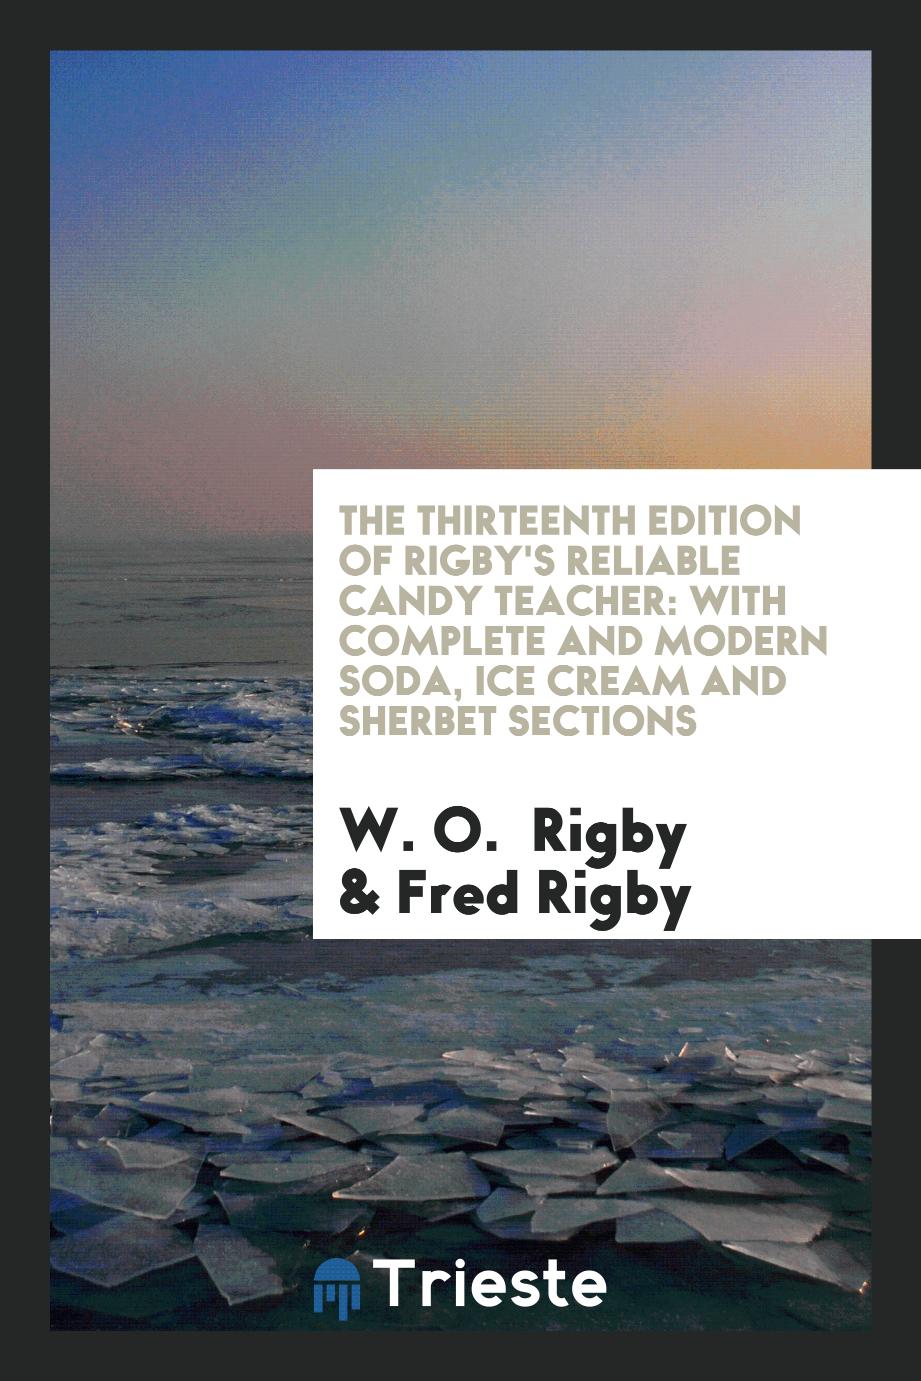 The Thirteenth Edition of Rigby's Reliable Candy Teacher: With Complete and Modern Soda, Ice Cream and Sherbet Sections